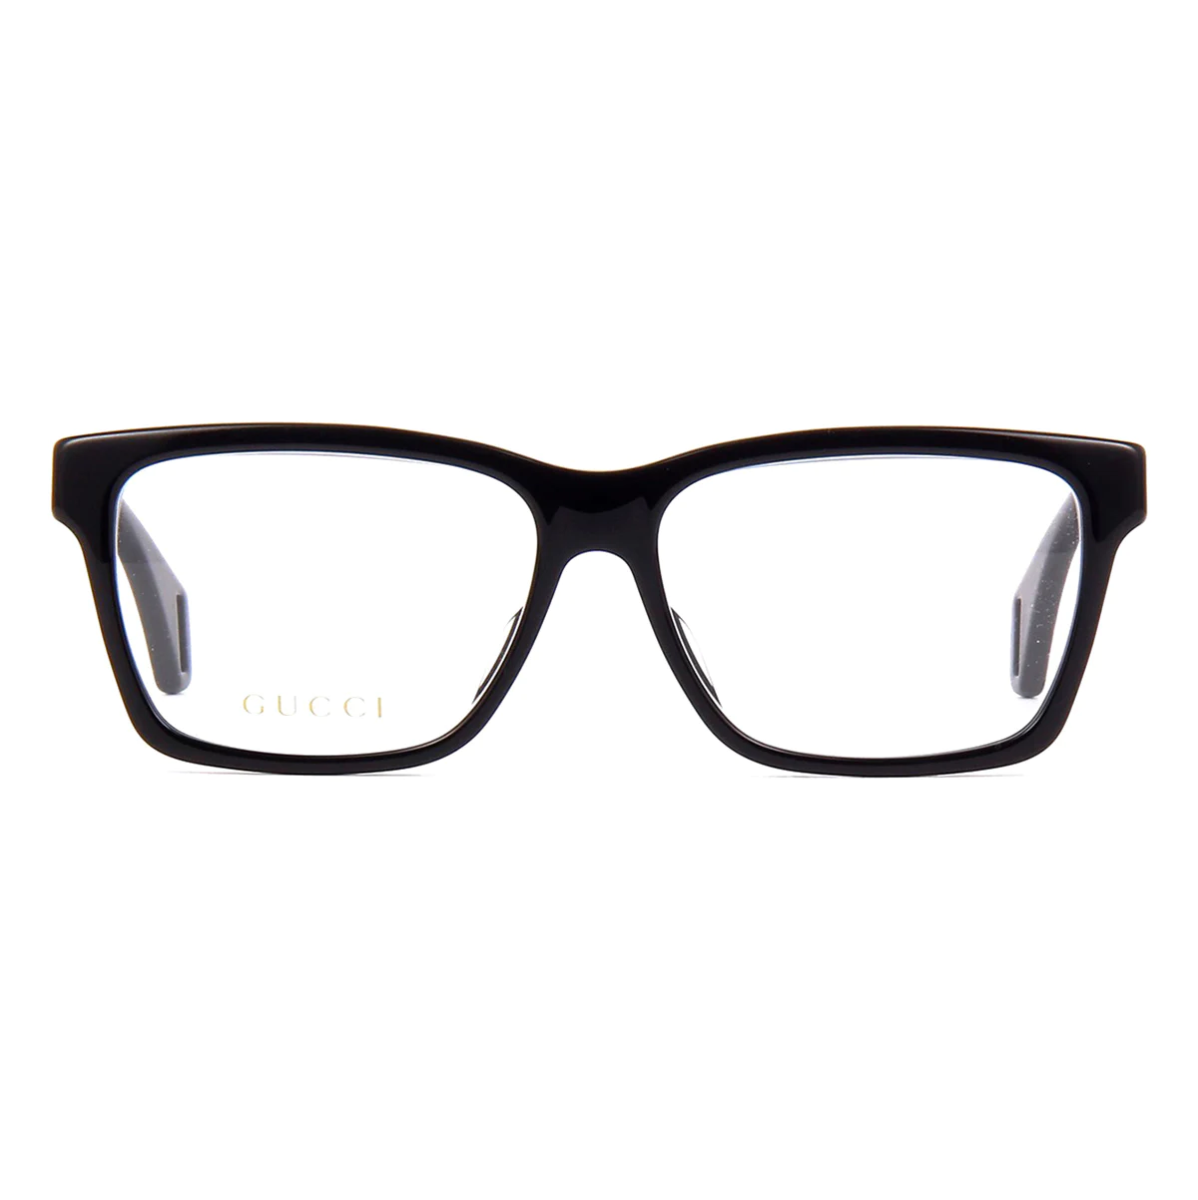 "Gucci 0466OA Men's Spectacle Frame - Explore the latest in Gucci eyewear at Optorium."